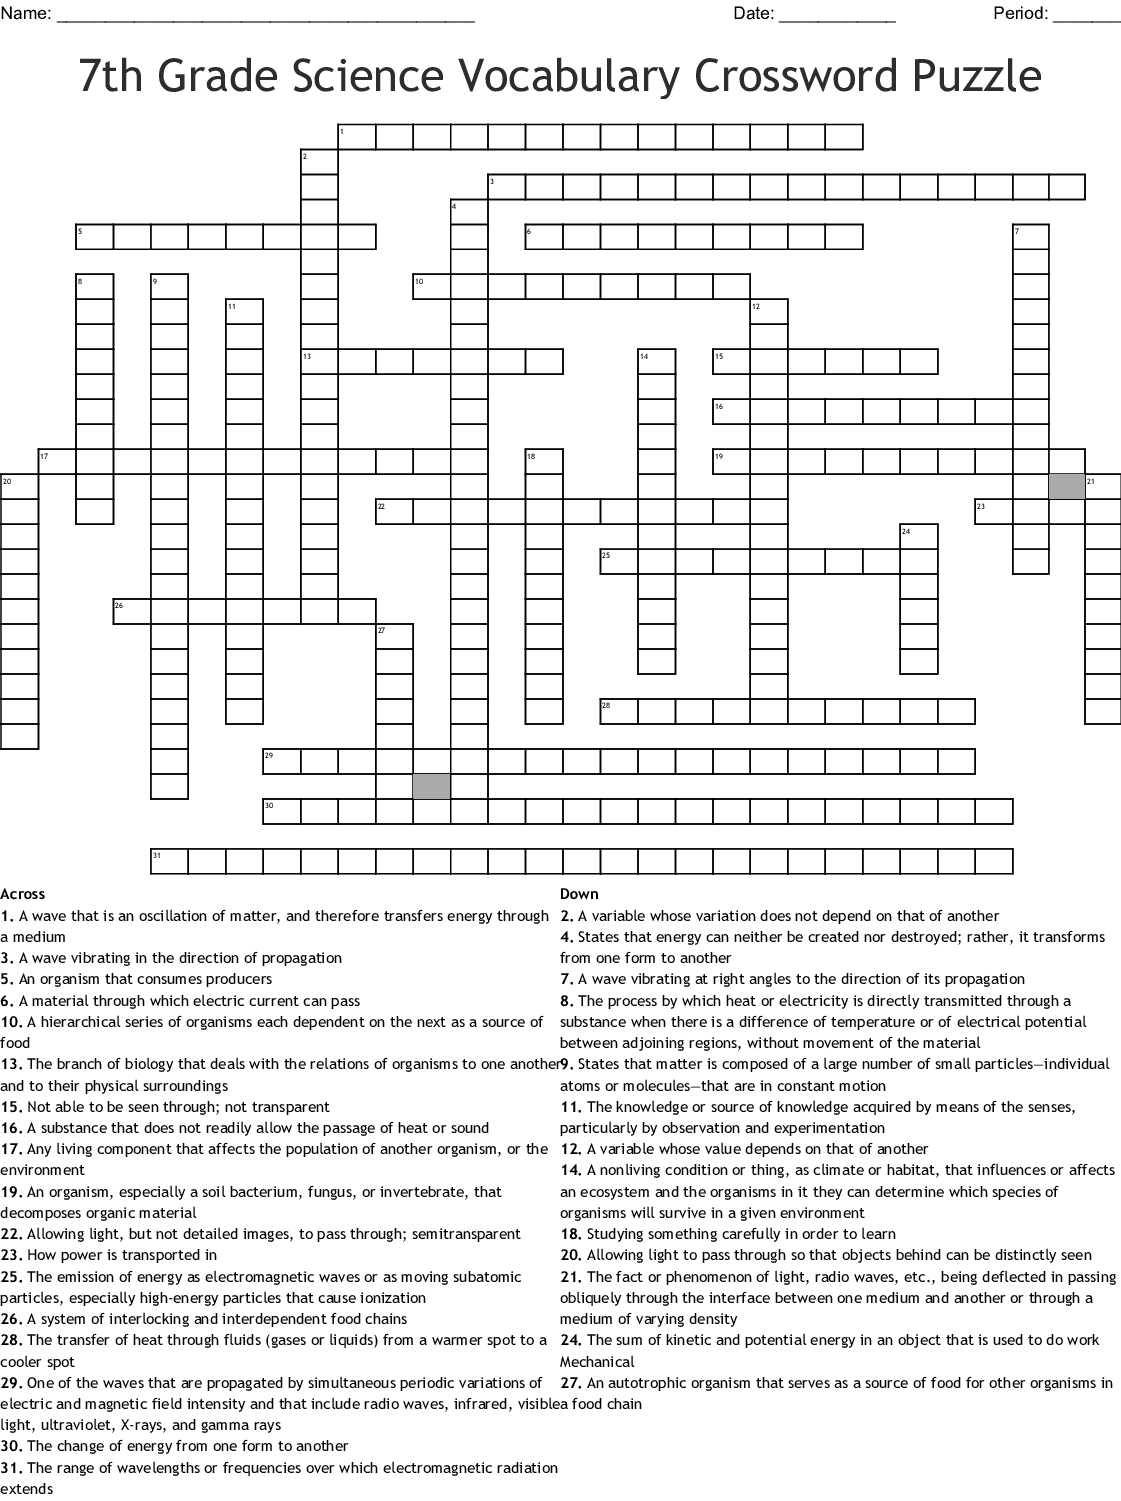 Crossword Puzzles Printable 7th Grade Fall